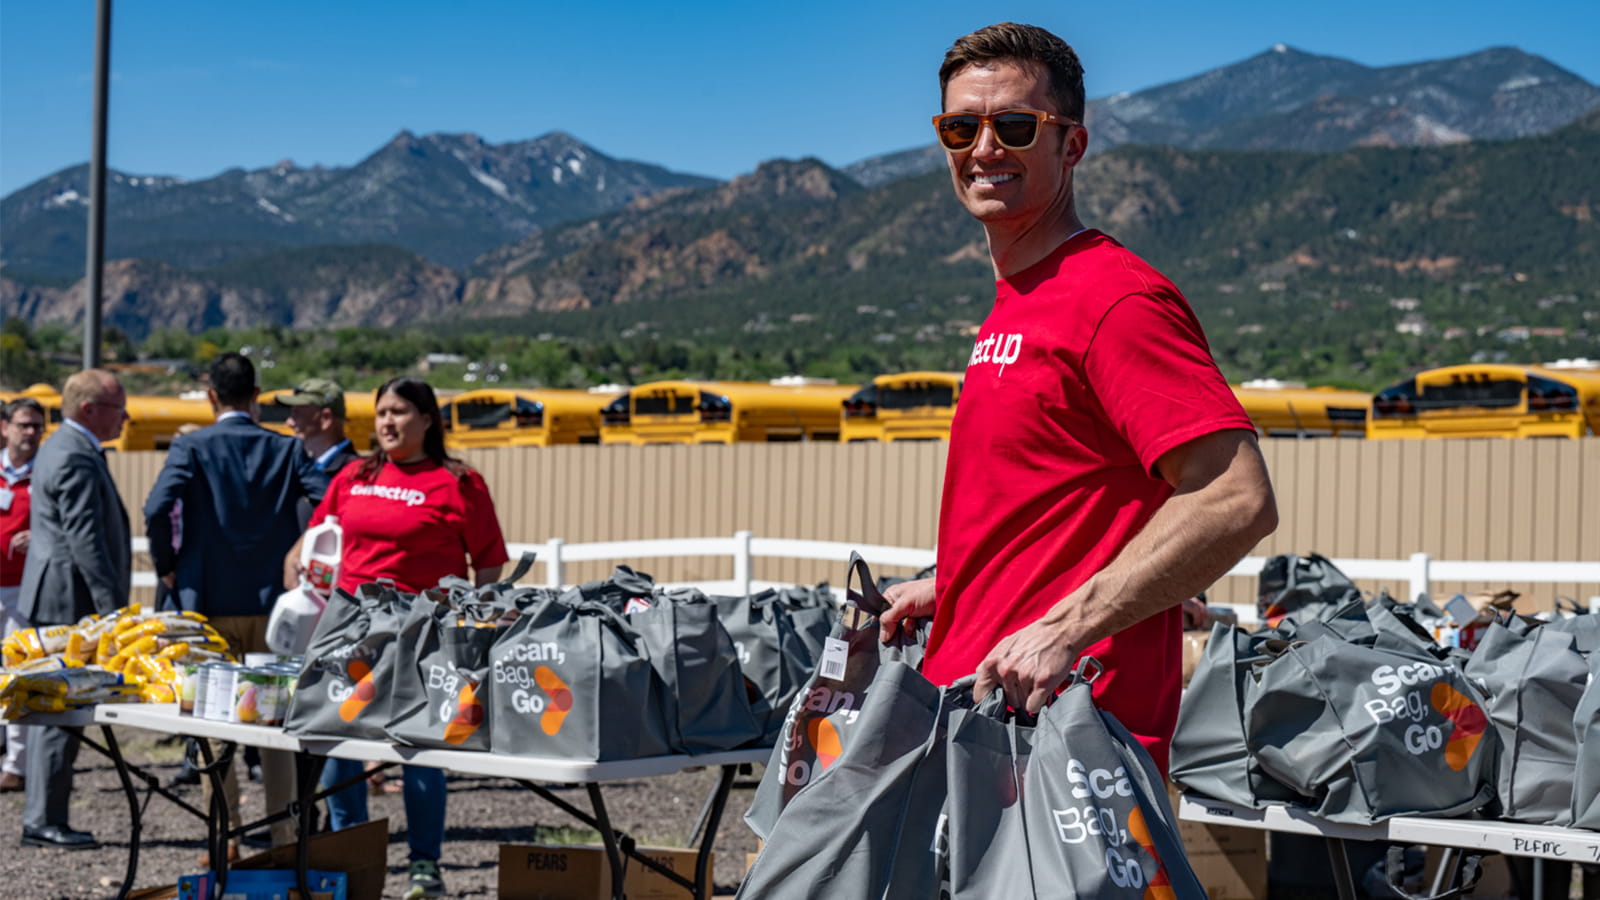 A volunteer, standing against a backdrop of mountains and clear sky, carries two bags of groceries during an event to provide food security for military families in Colorado.